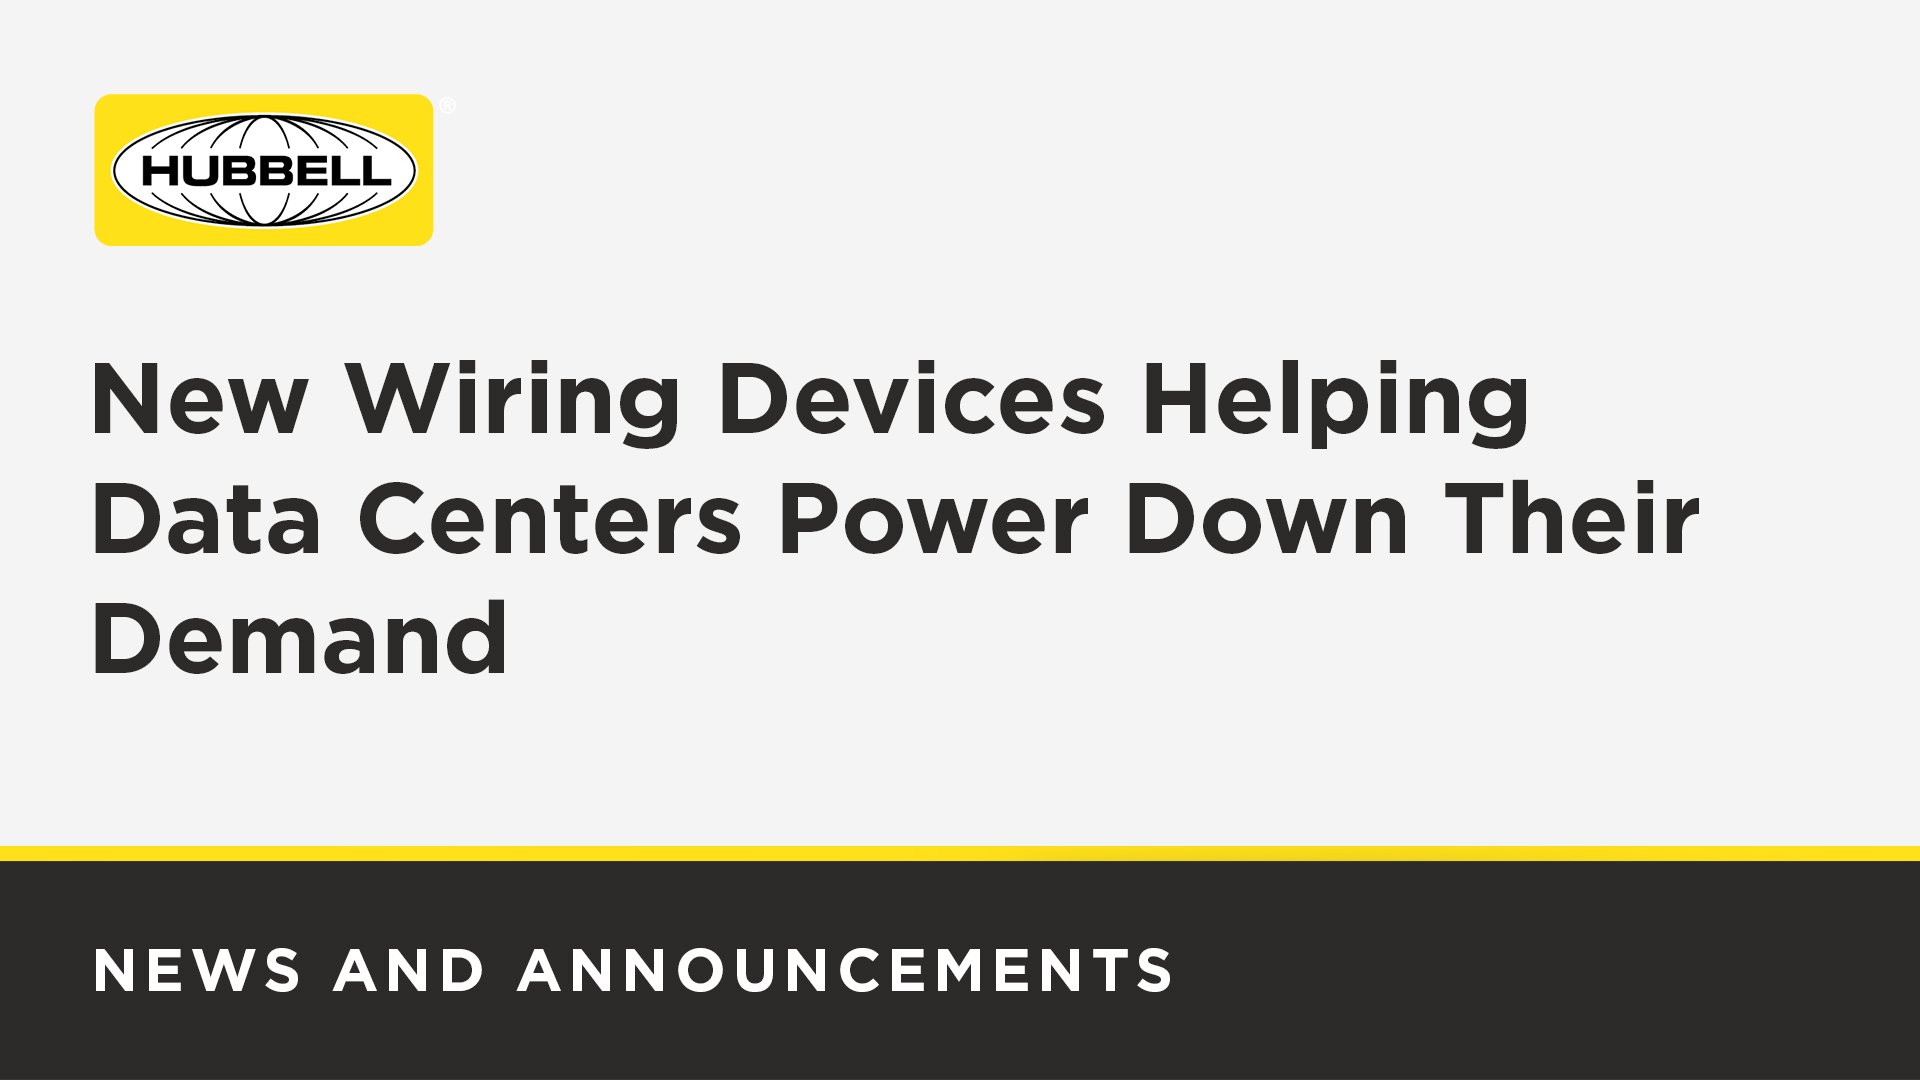 New Wiring Devices Helping Data Centers Power Down Their Demand